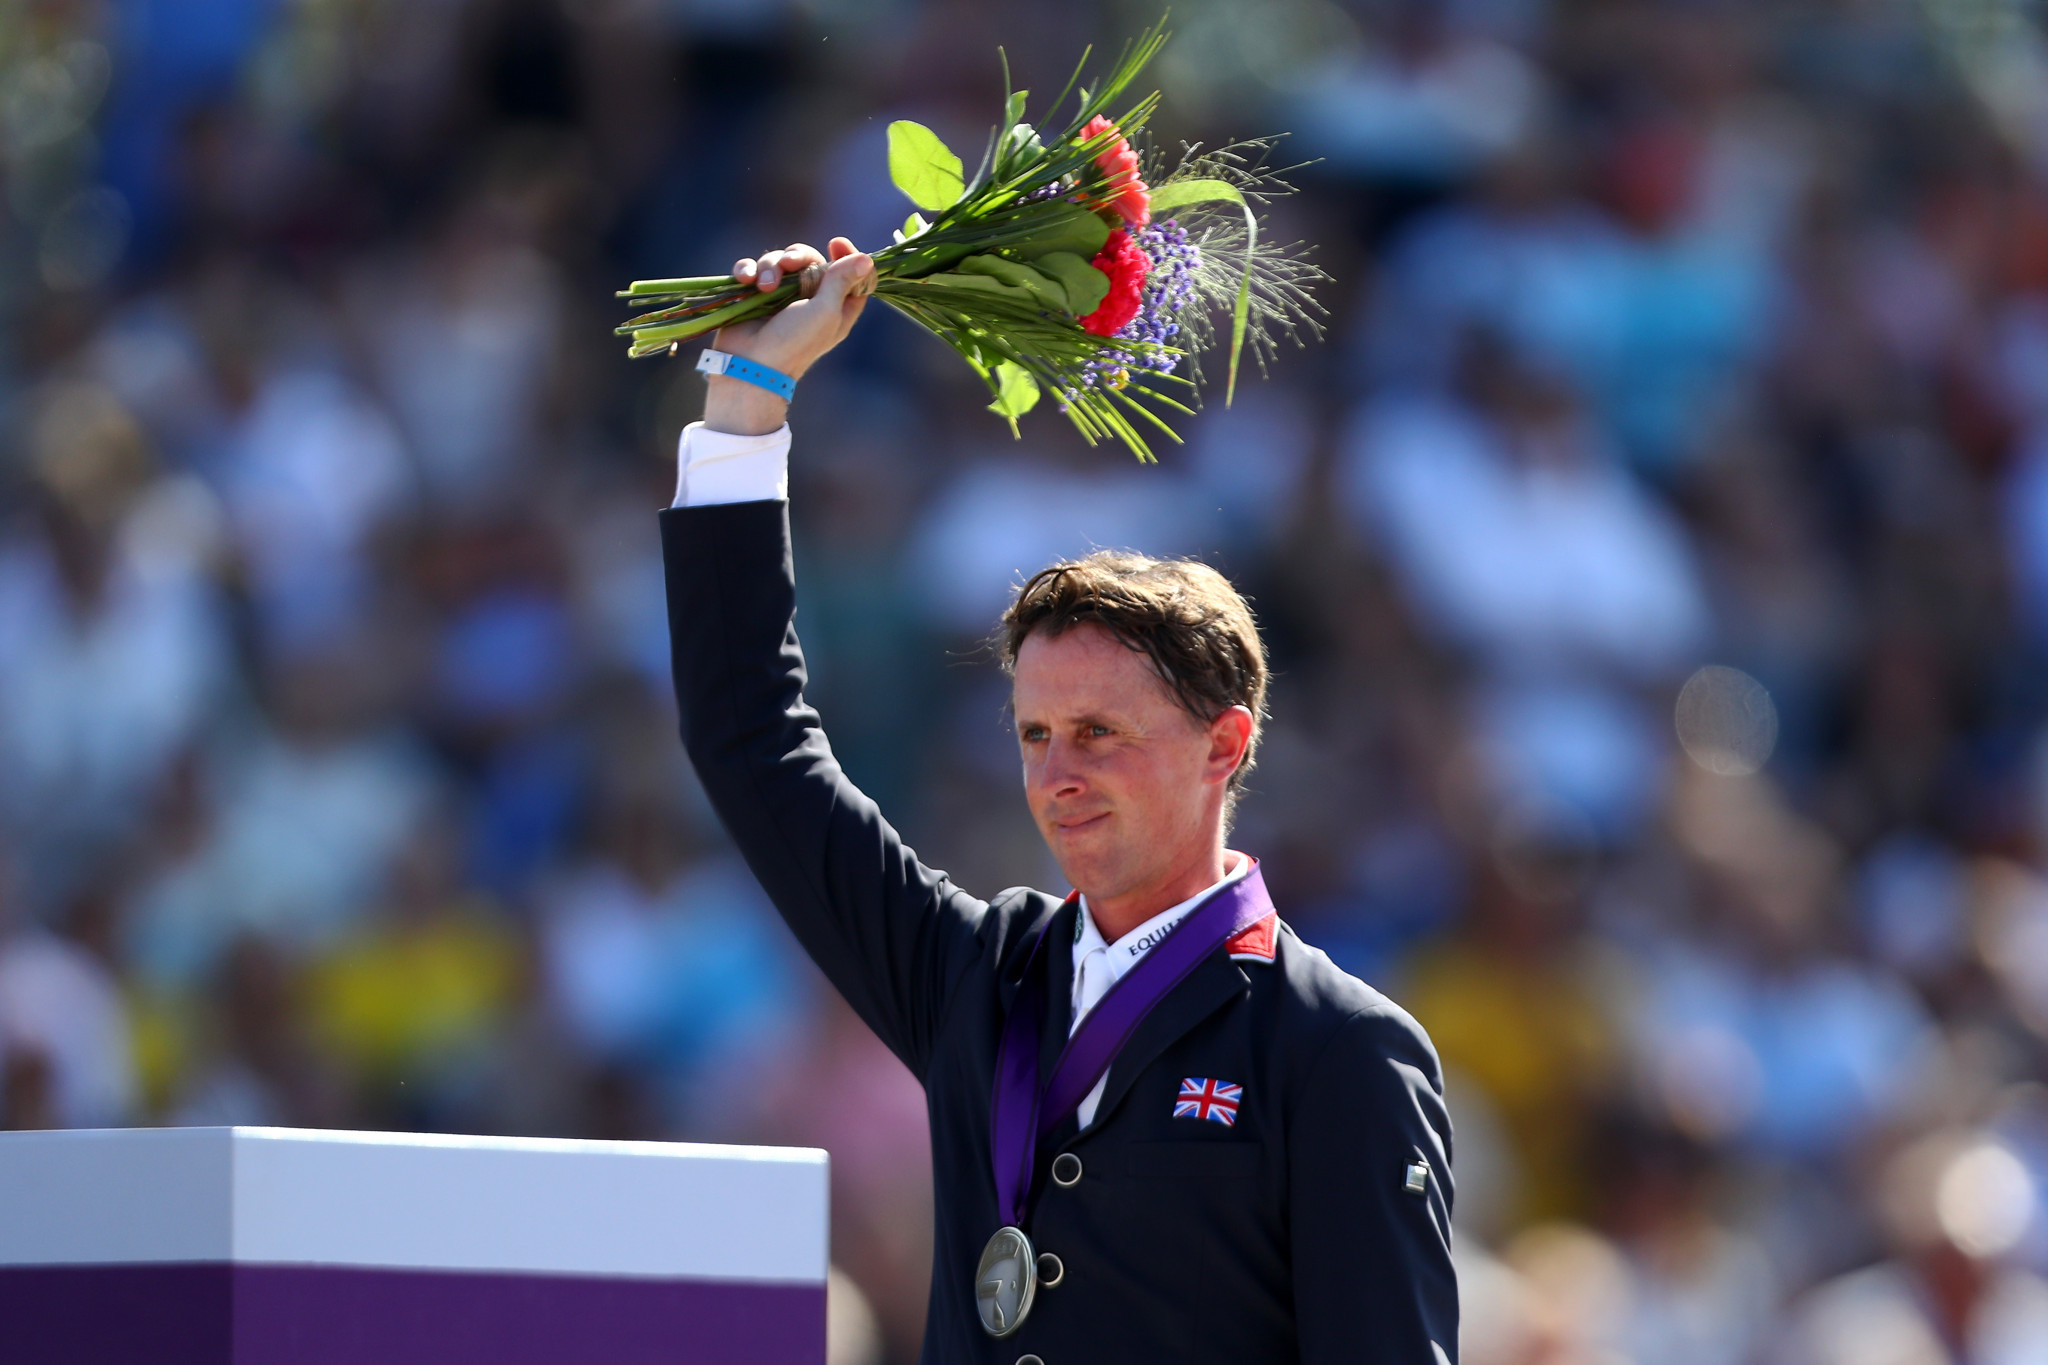 Britain’s Ben Maher had to settle for second in the individual jumping event ©Getty Images